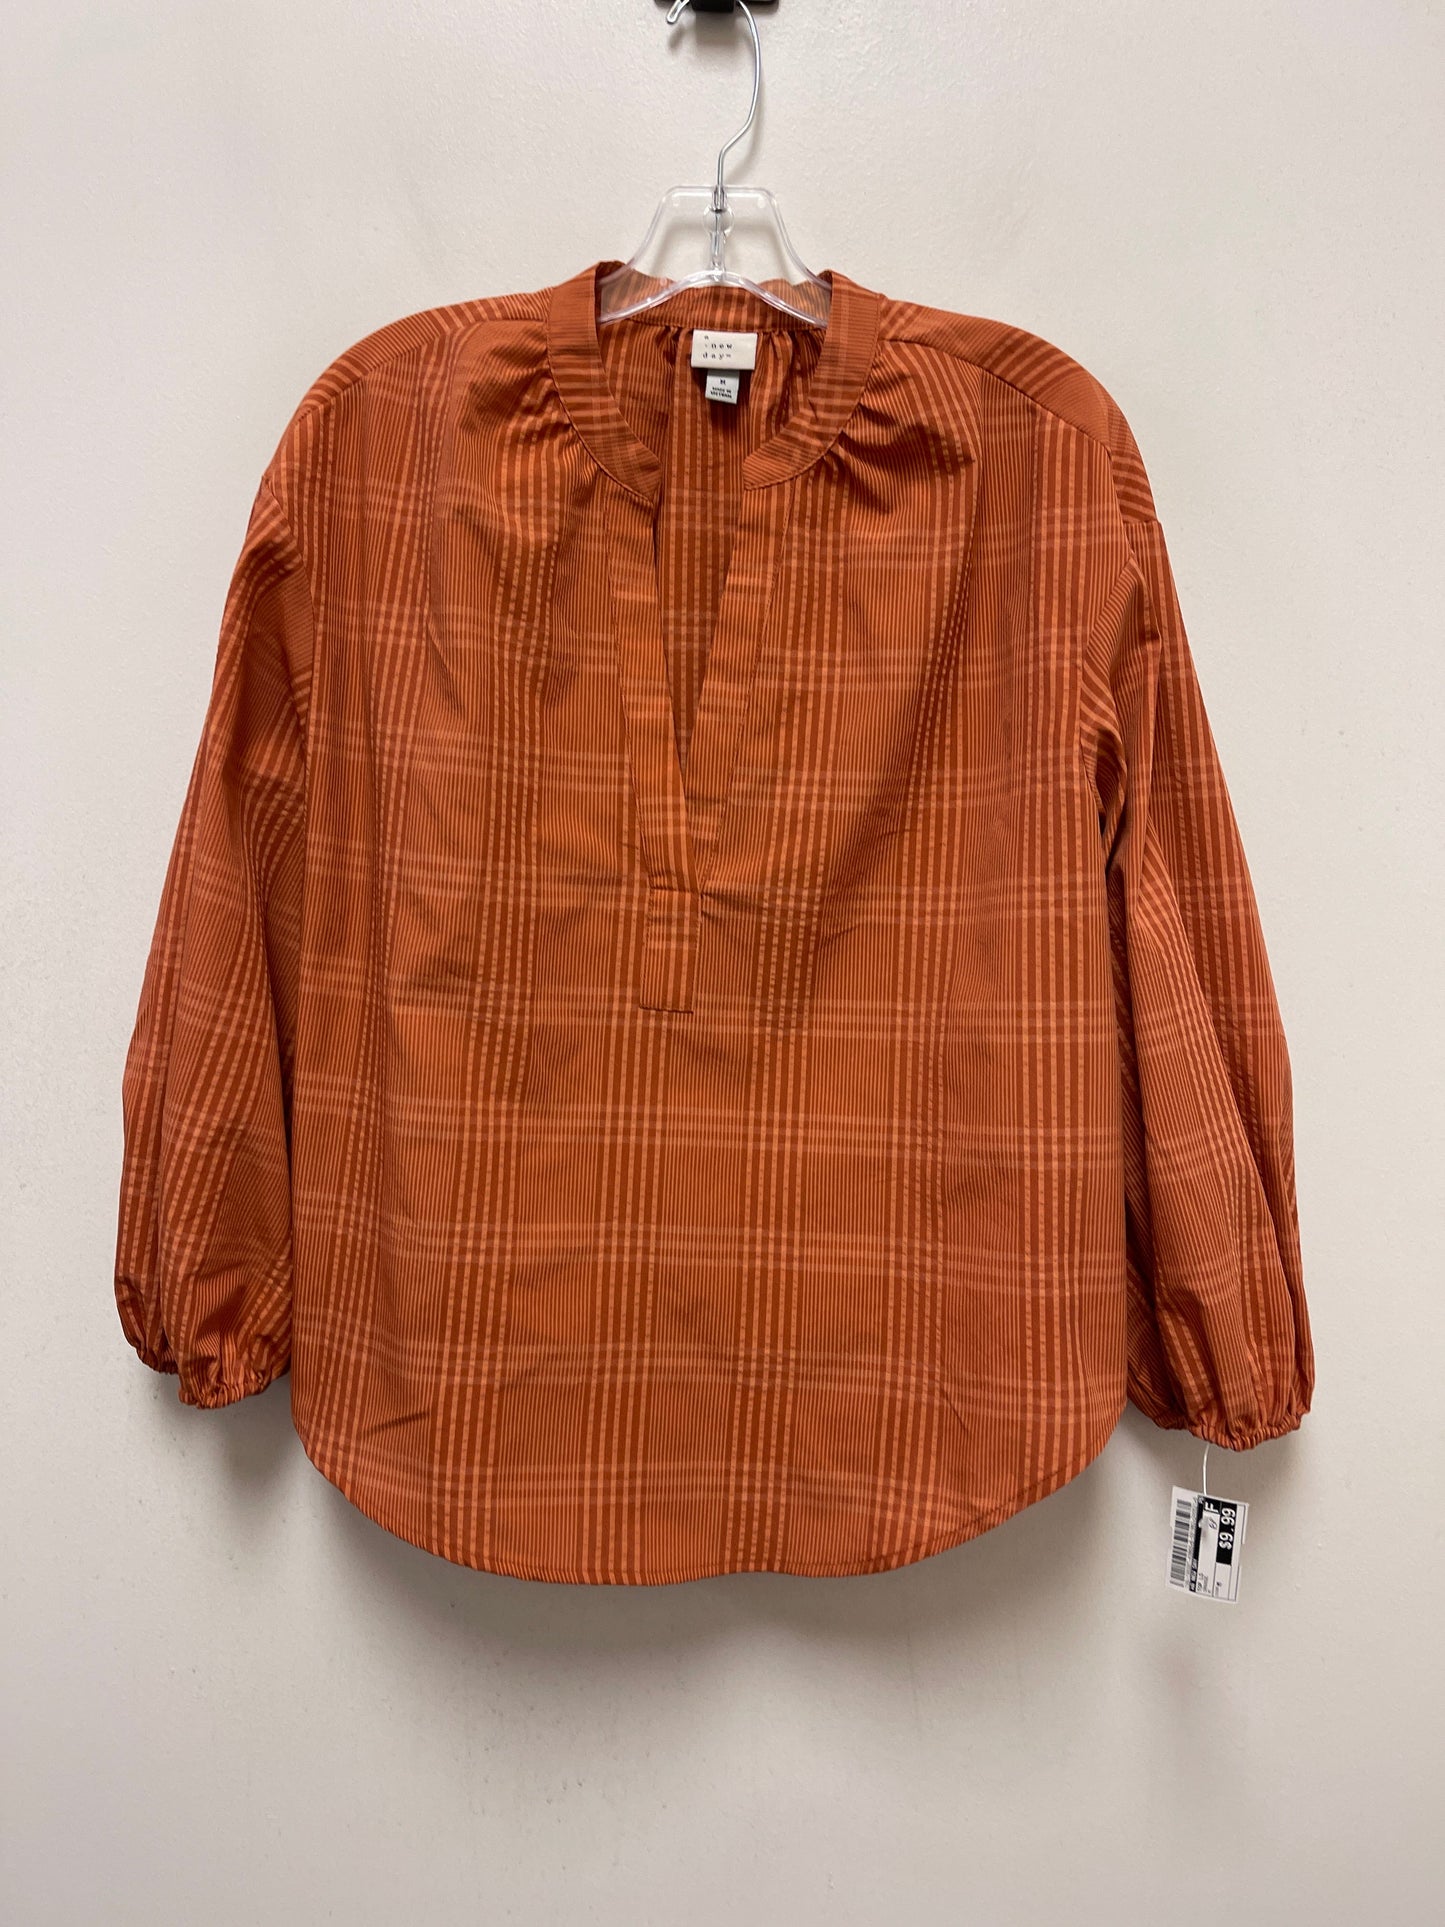 Orange Top Long Sleeve A New Day, Size M